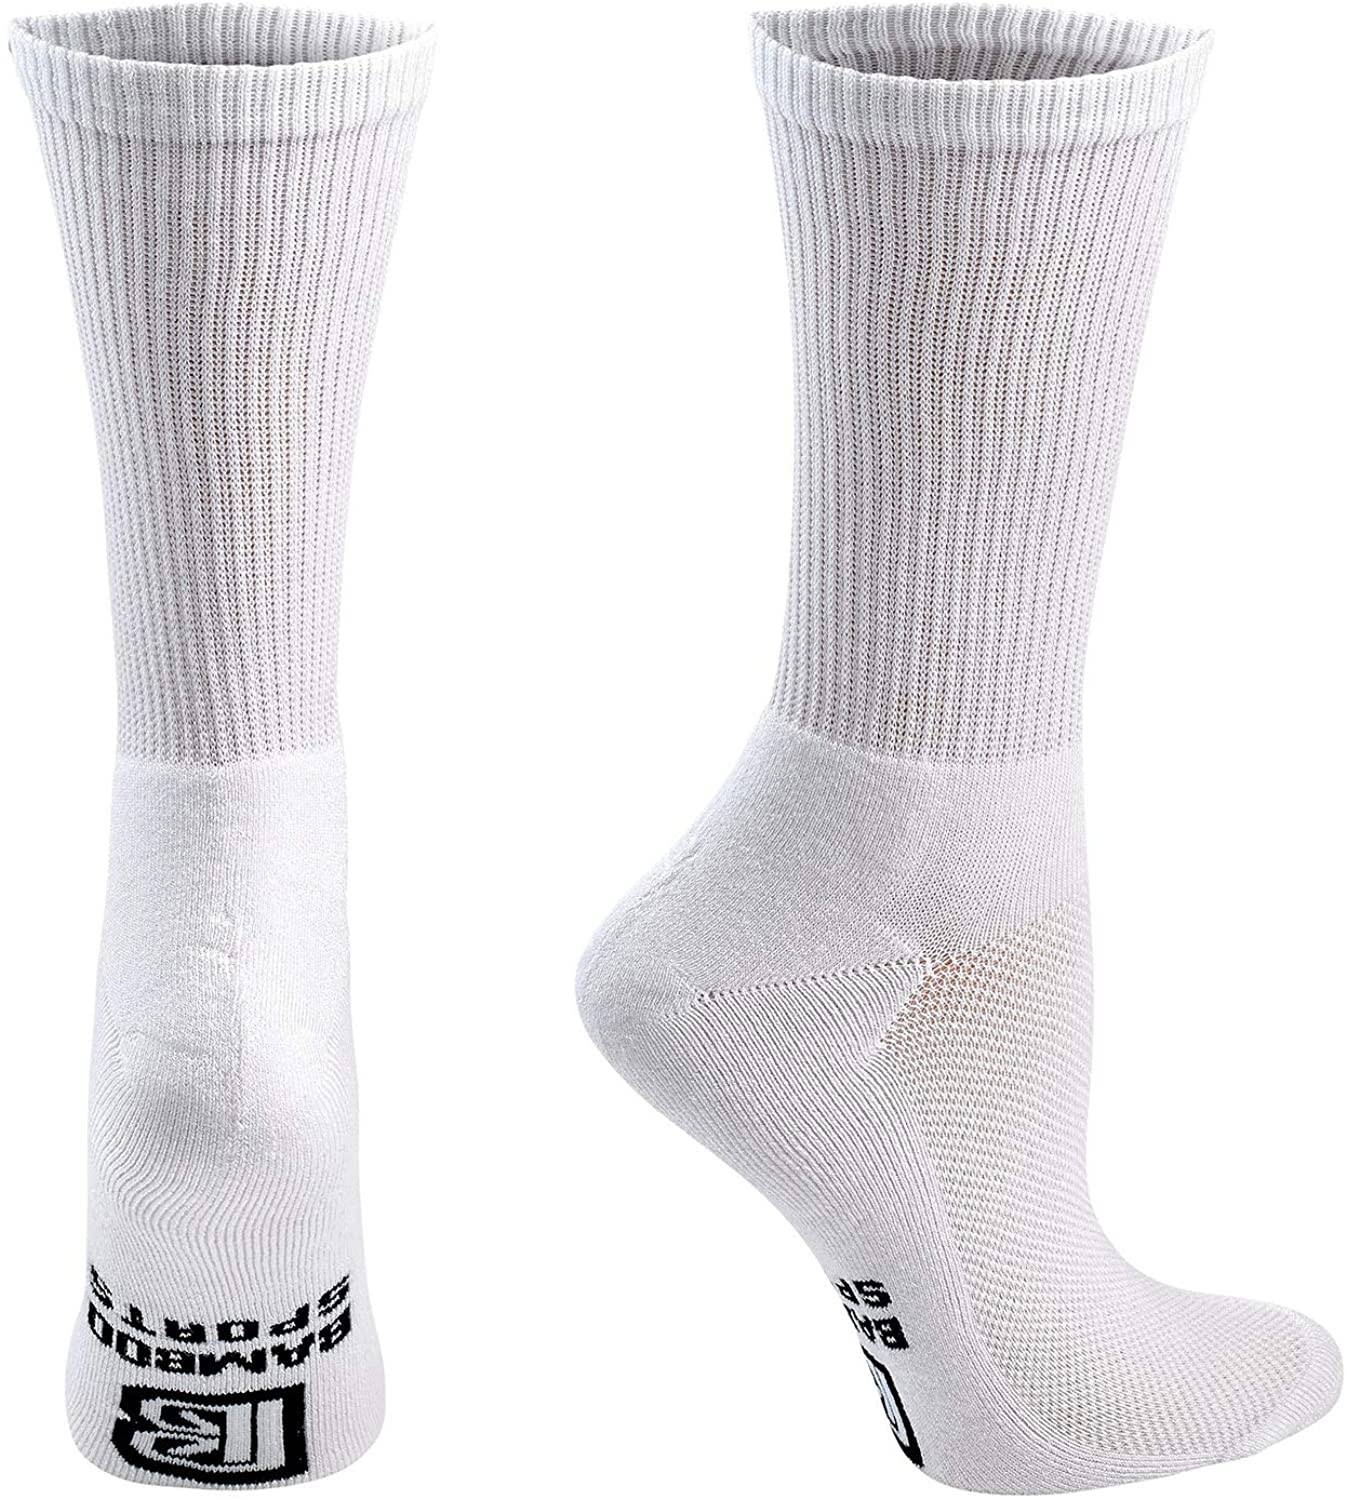 Bamboo Sports Men's Crew Socks Which are Comfortable Odor Eliminating & Moisture Wicking with Three Main Colors, White, Black, and Gray.